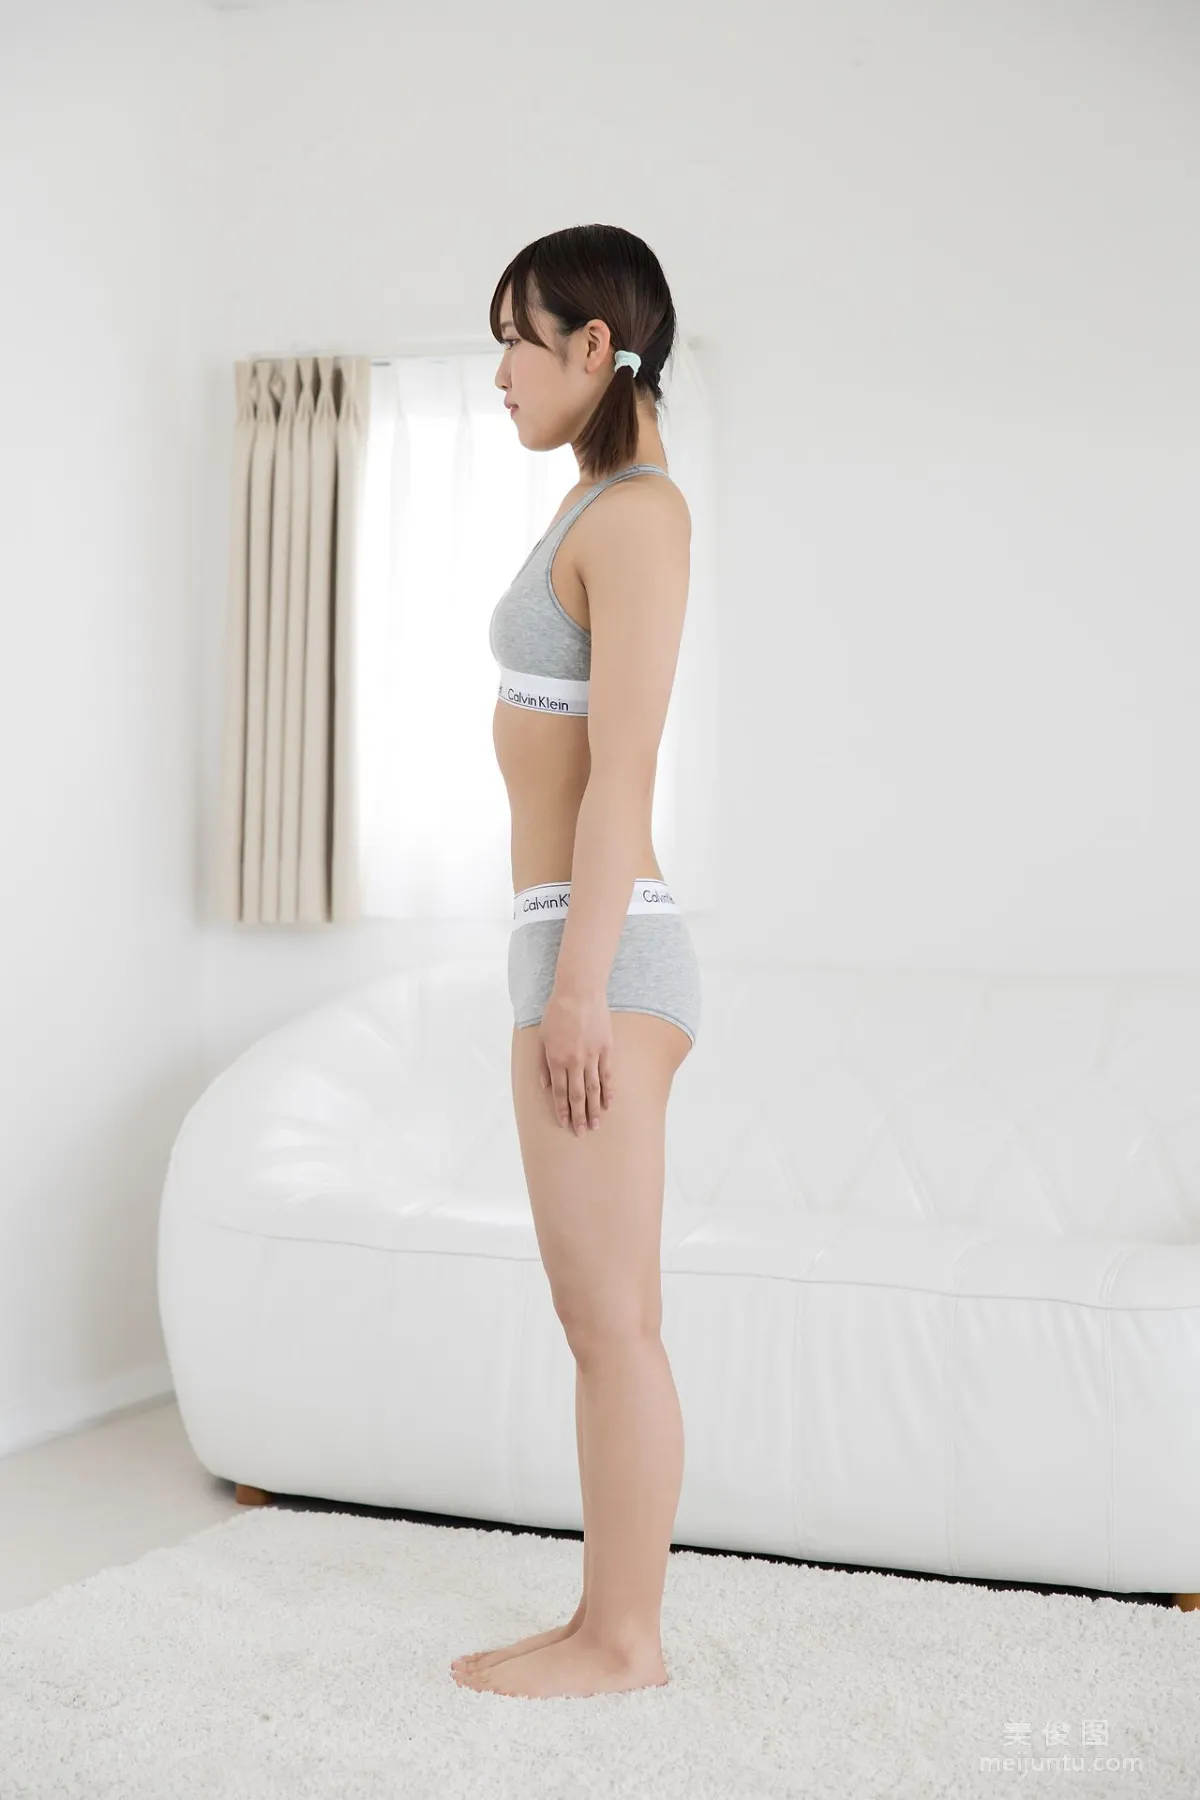 [Minisuka.tv] 香月杏珠/香月りお - Limited Gallery 21.23